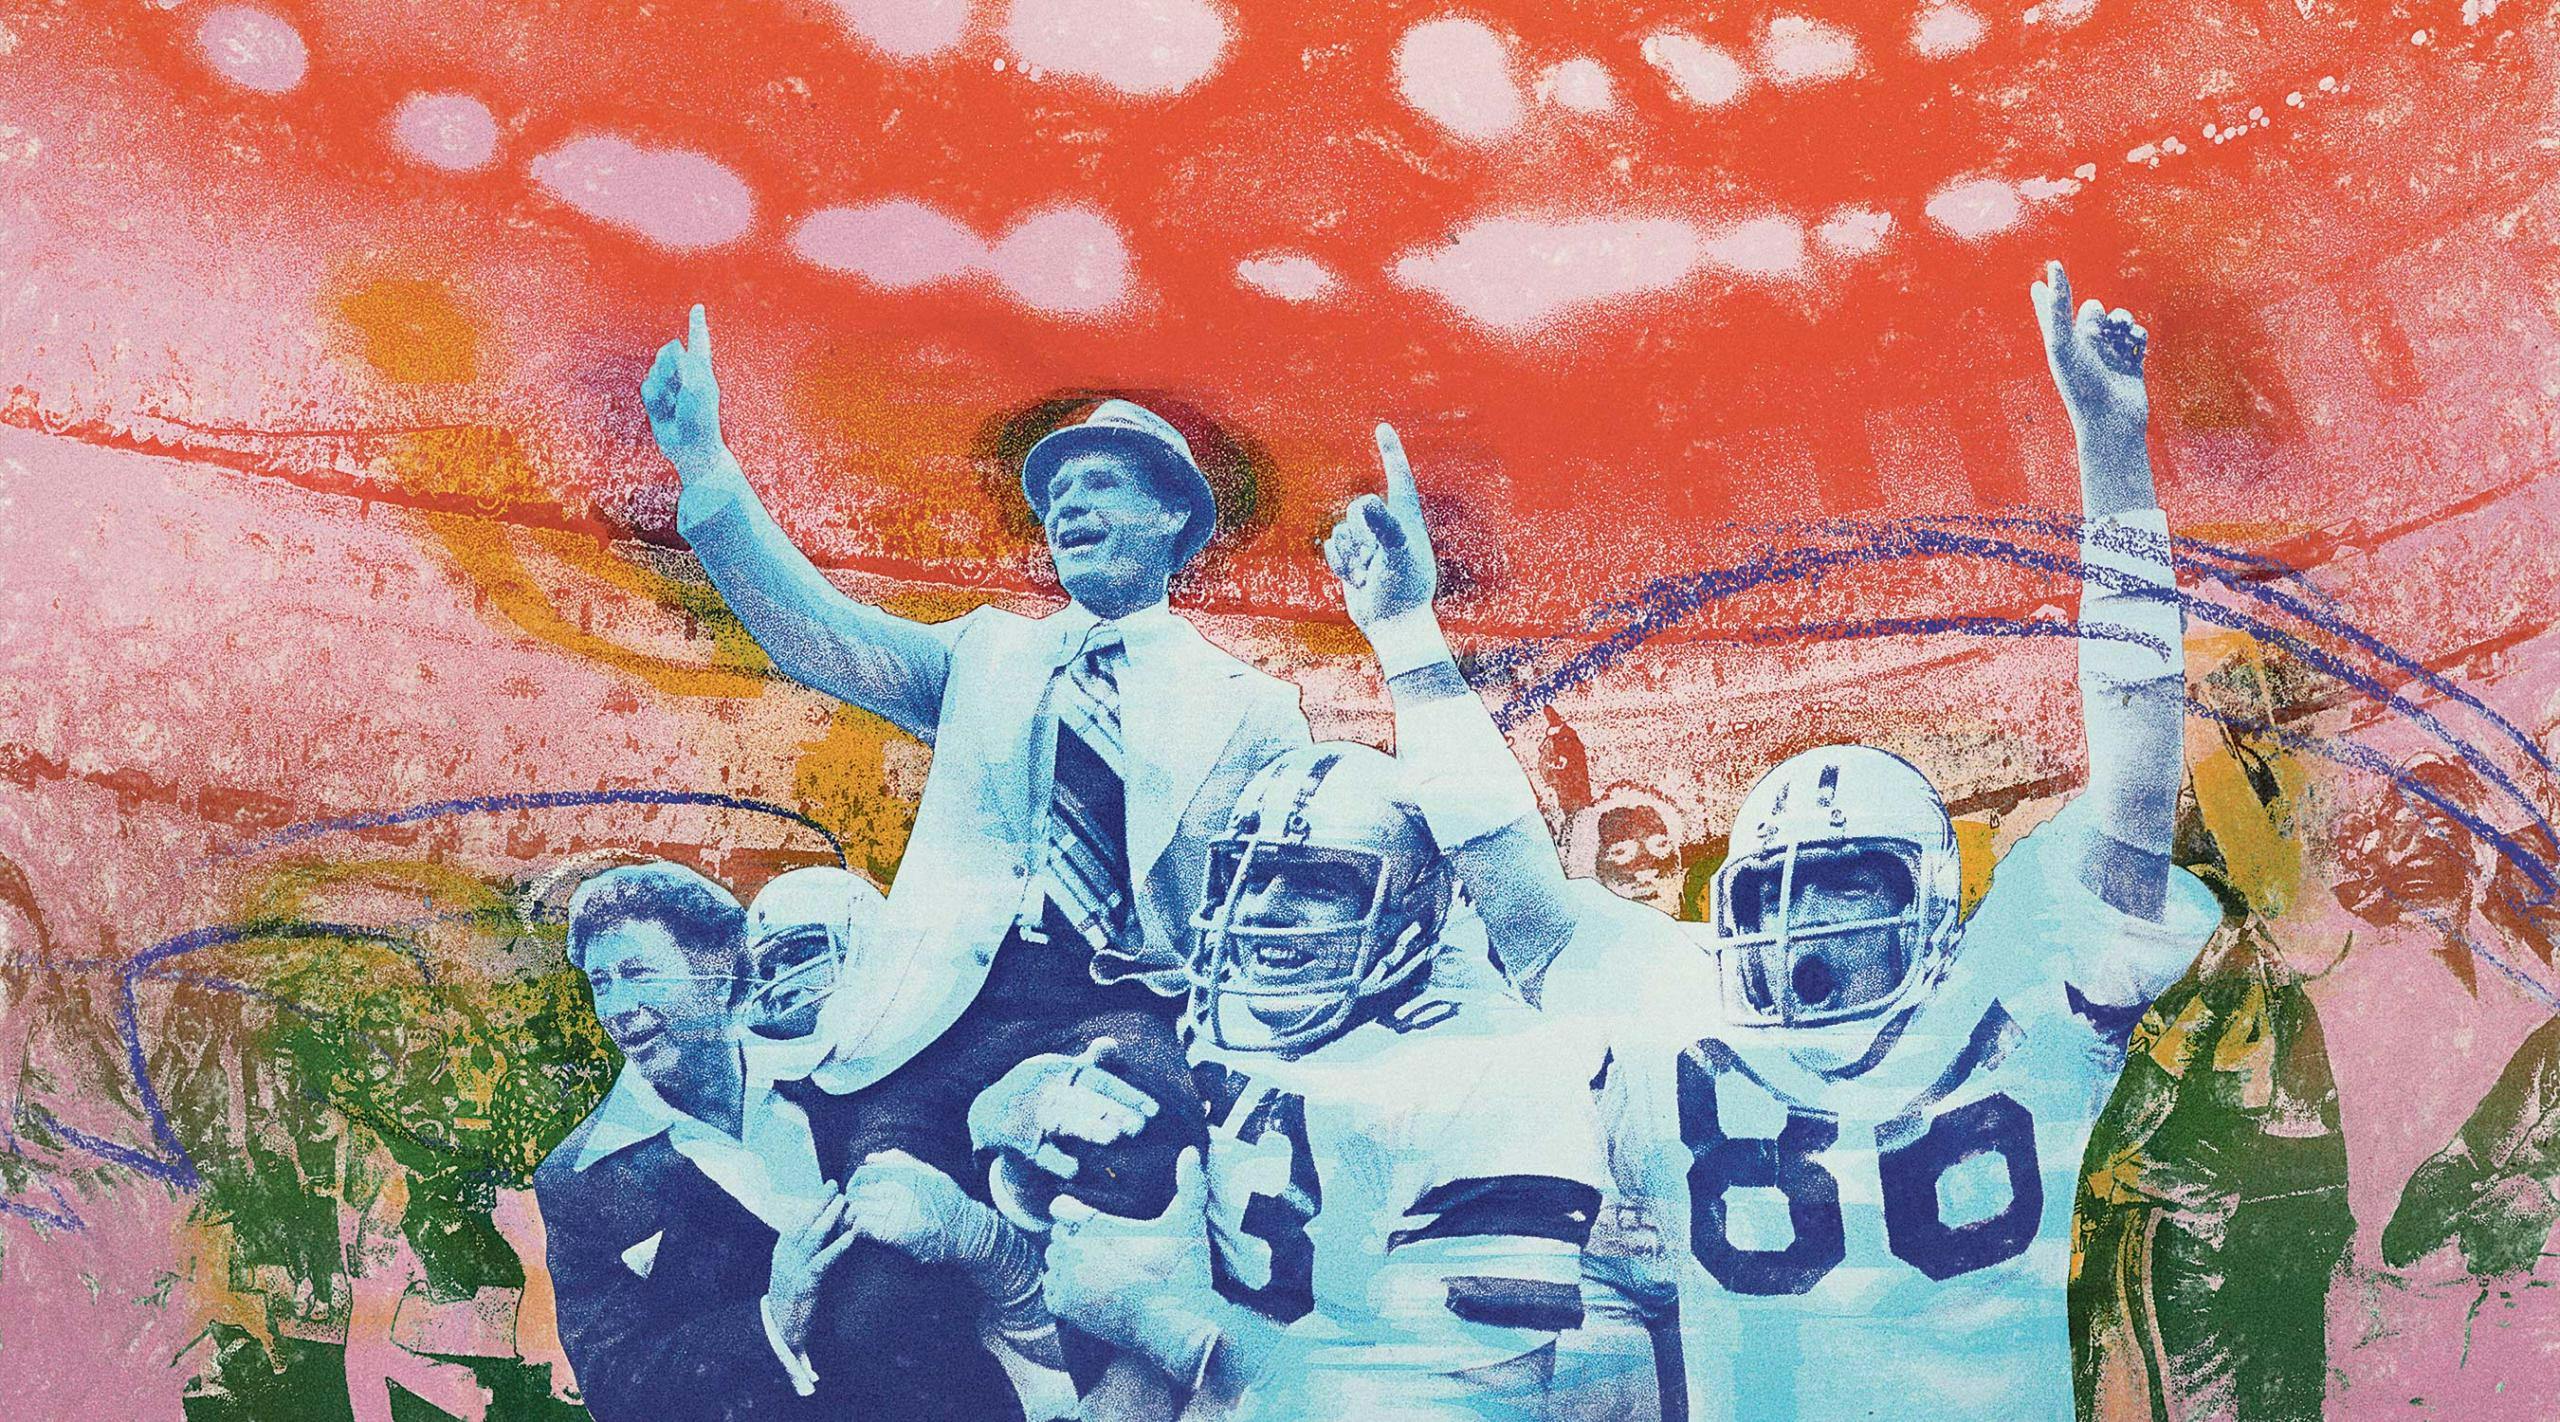 The Dallas Cowboys Used to Sell NFL Dynasties. Now They Sell Drama.